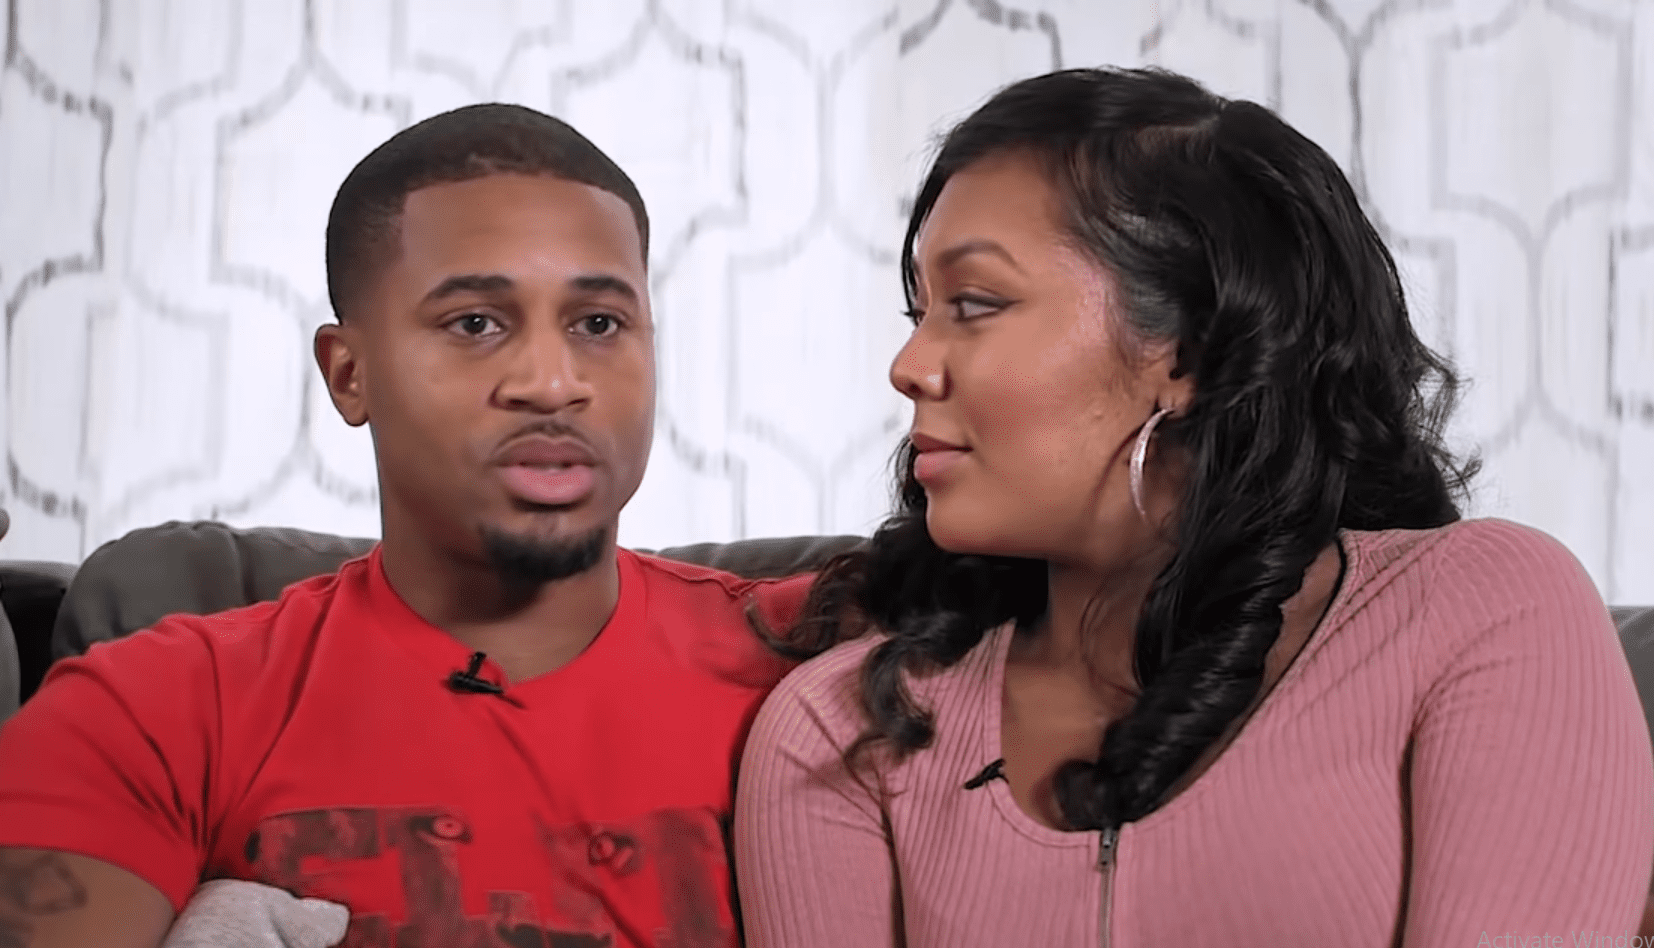 Devale Ellis gets emotional reflecting on his wife, Khadeen's support during a "dark time" in an interview with "Black Love." | Photo: YouTube/OWN